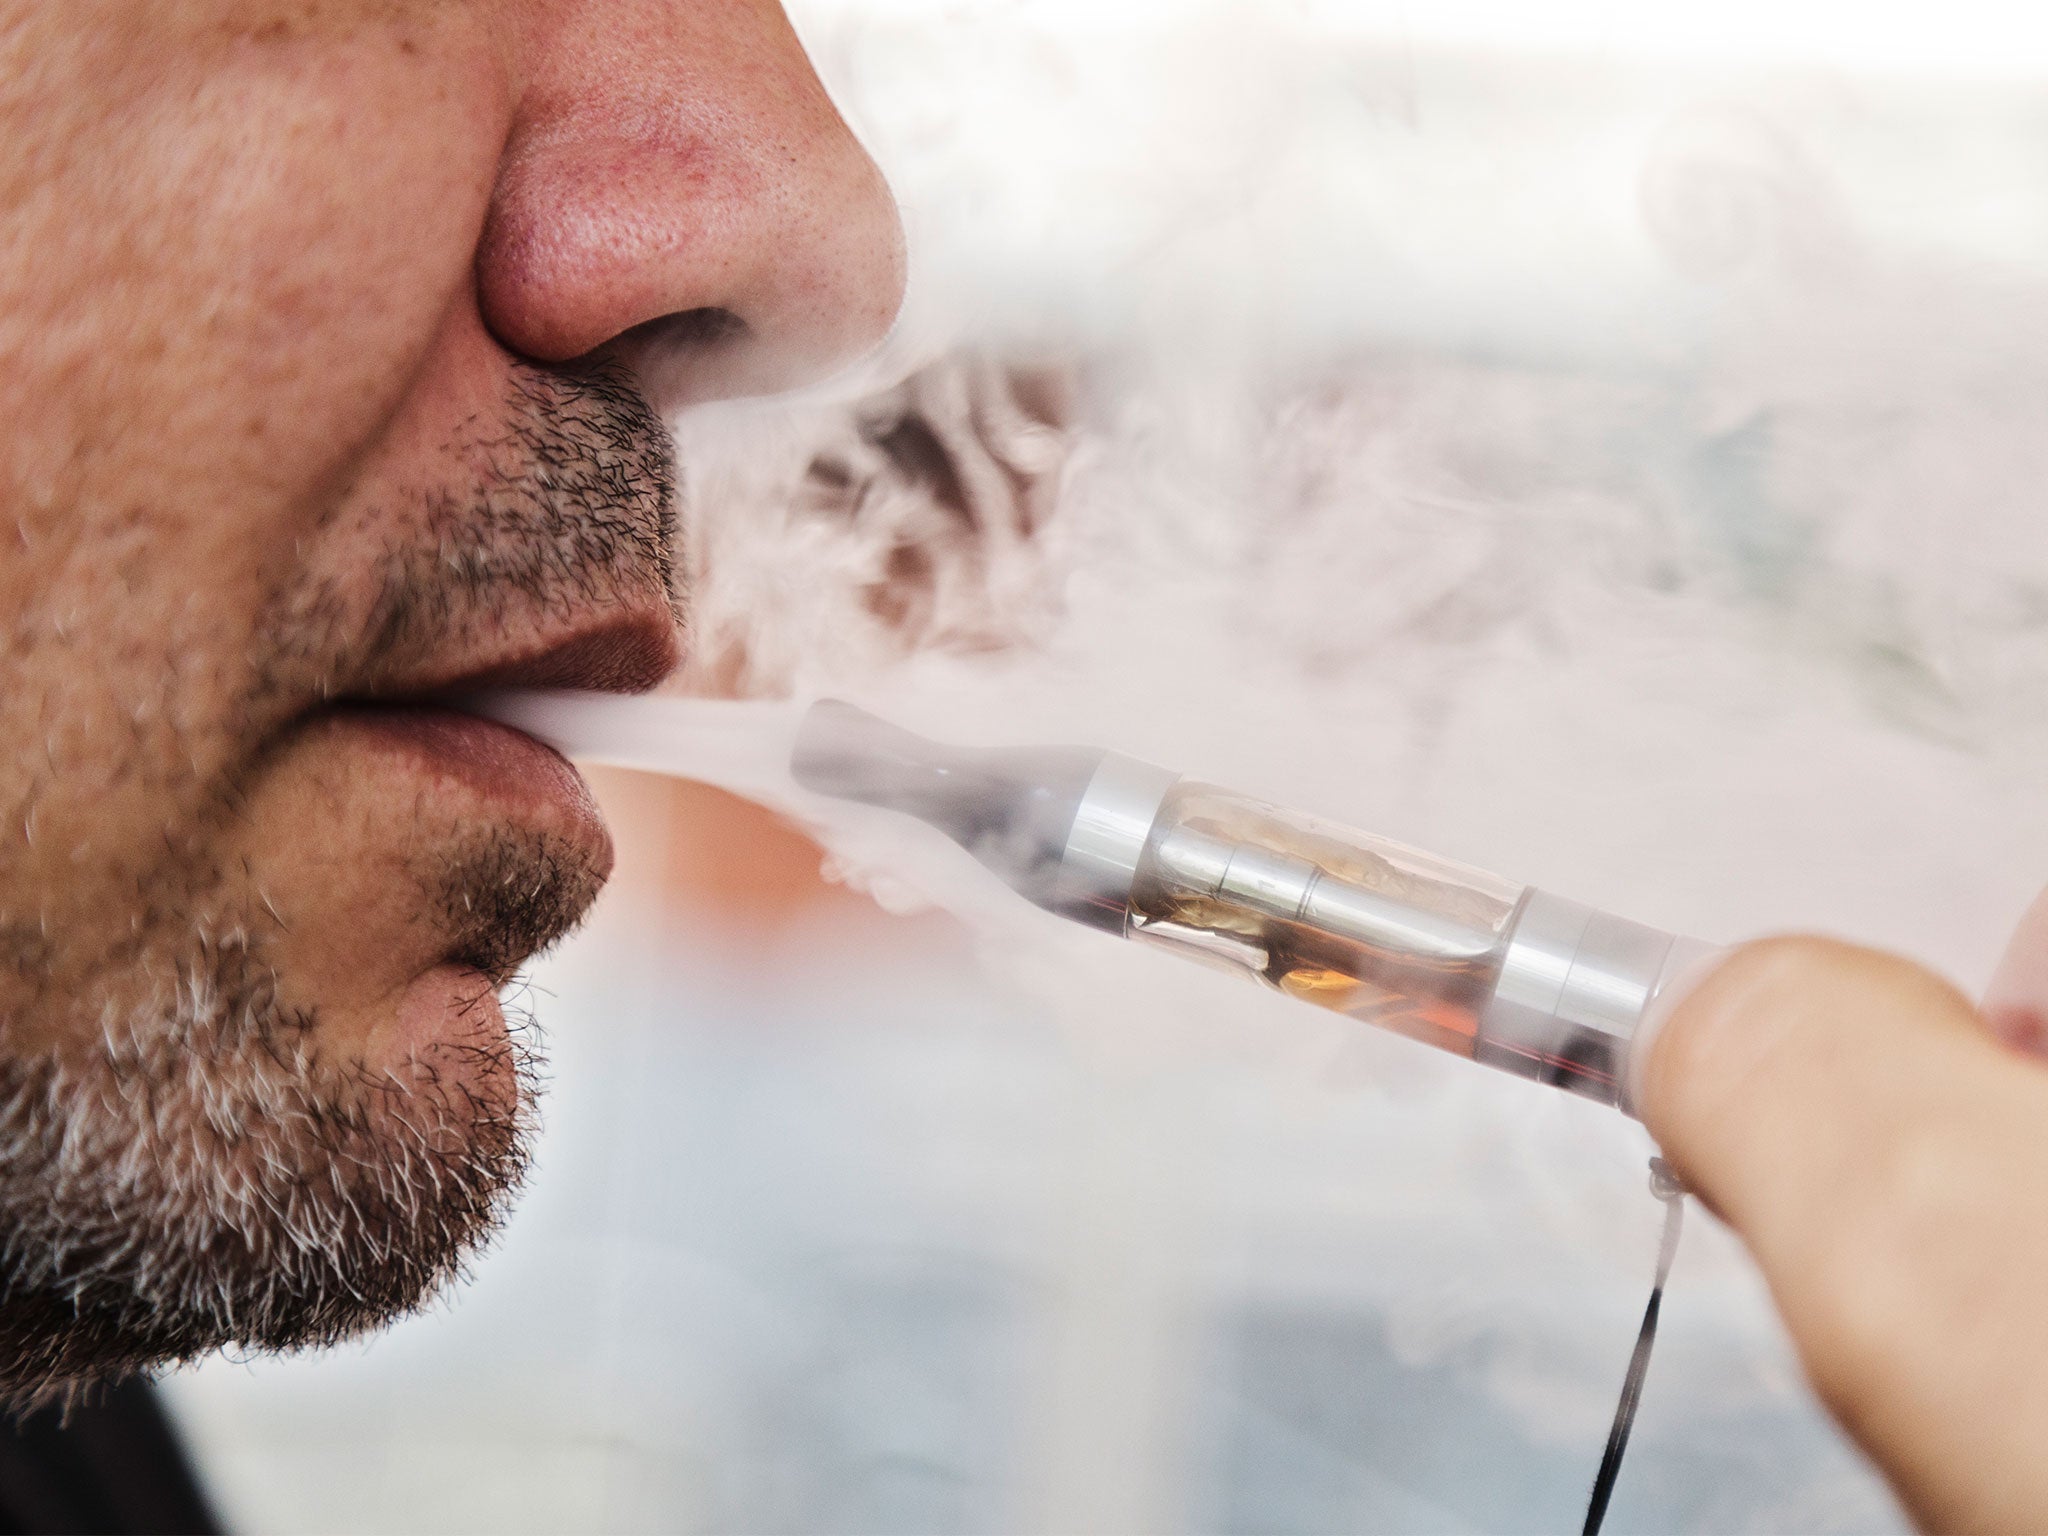 San Francisco to become first US city to ban e-cigarette sales amid vaping crackdown